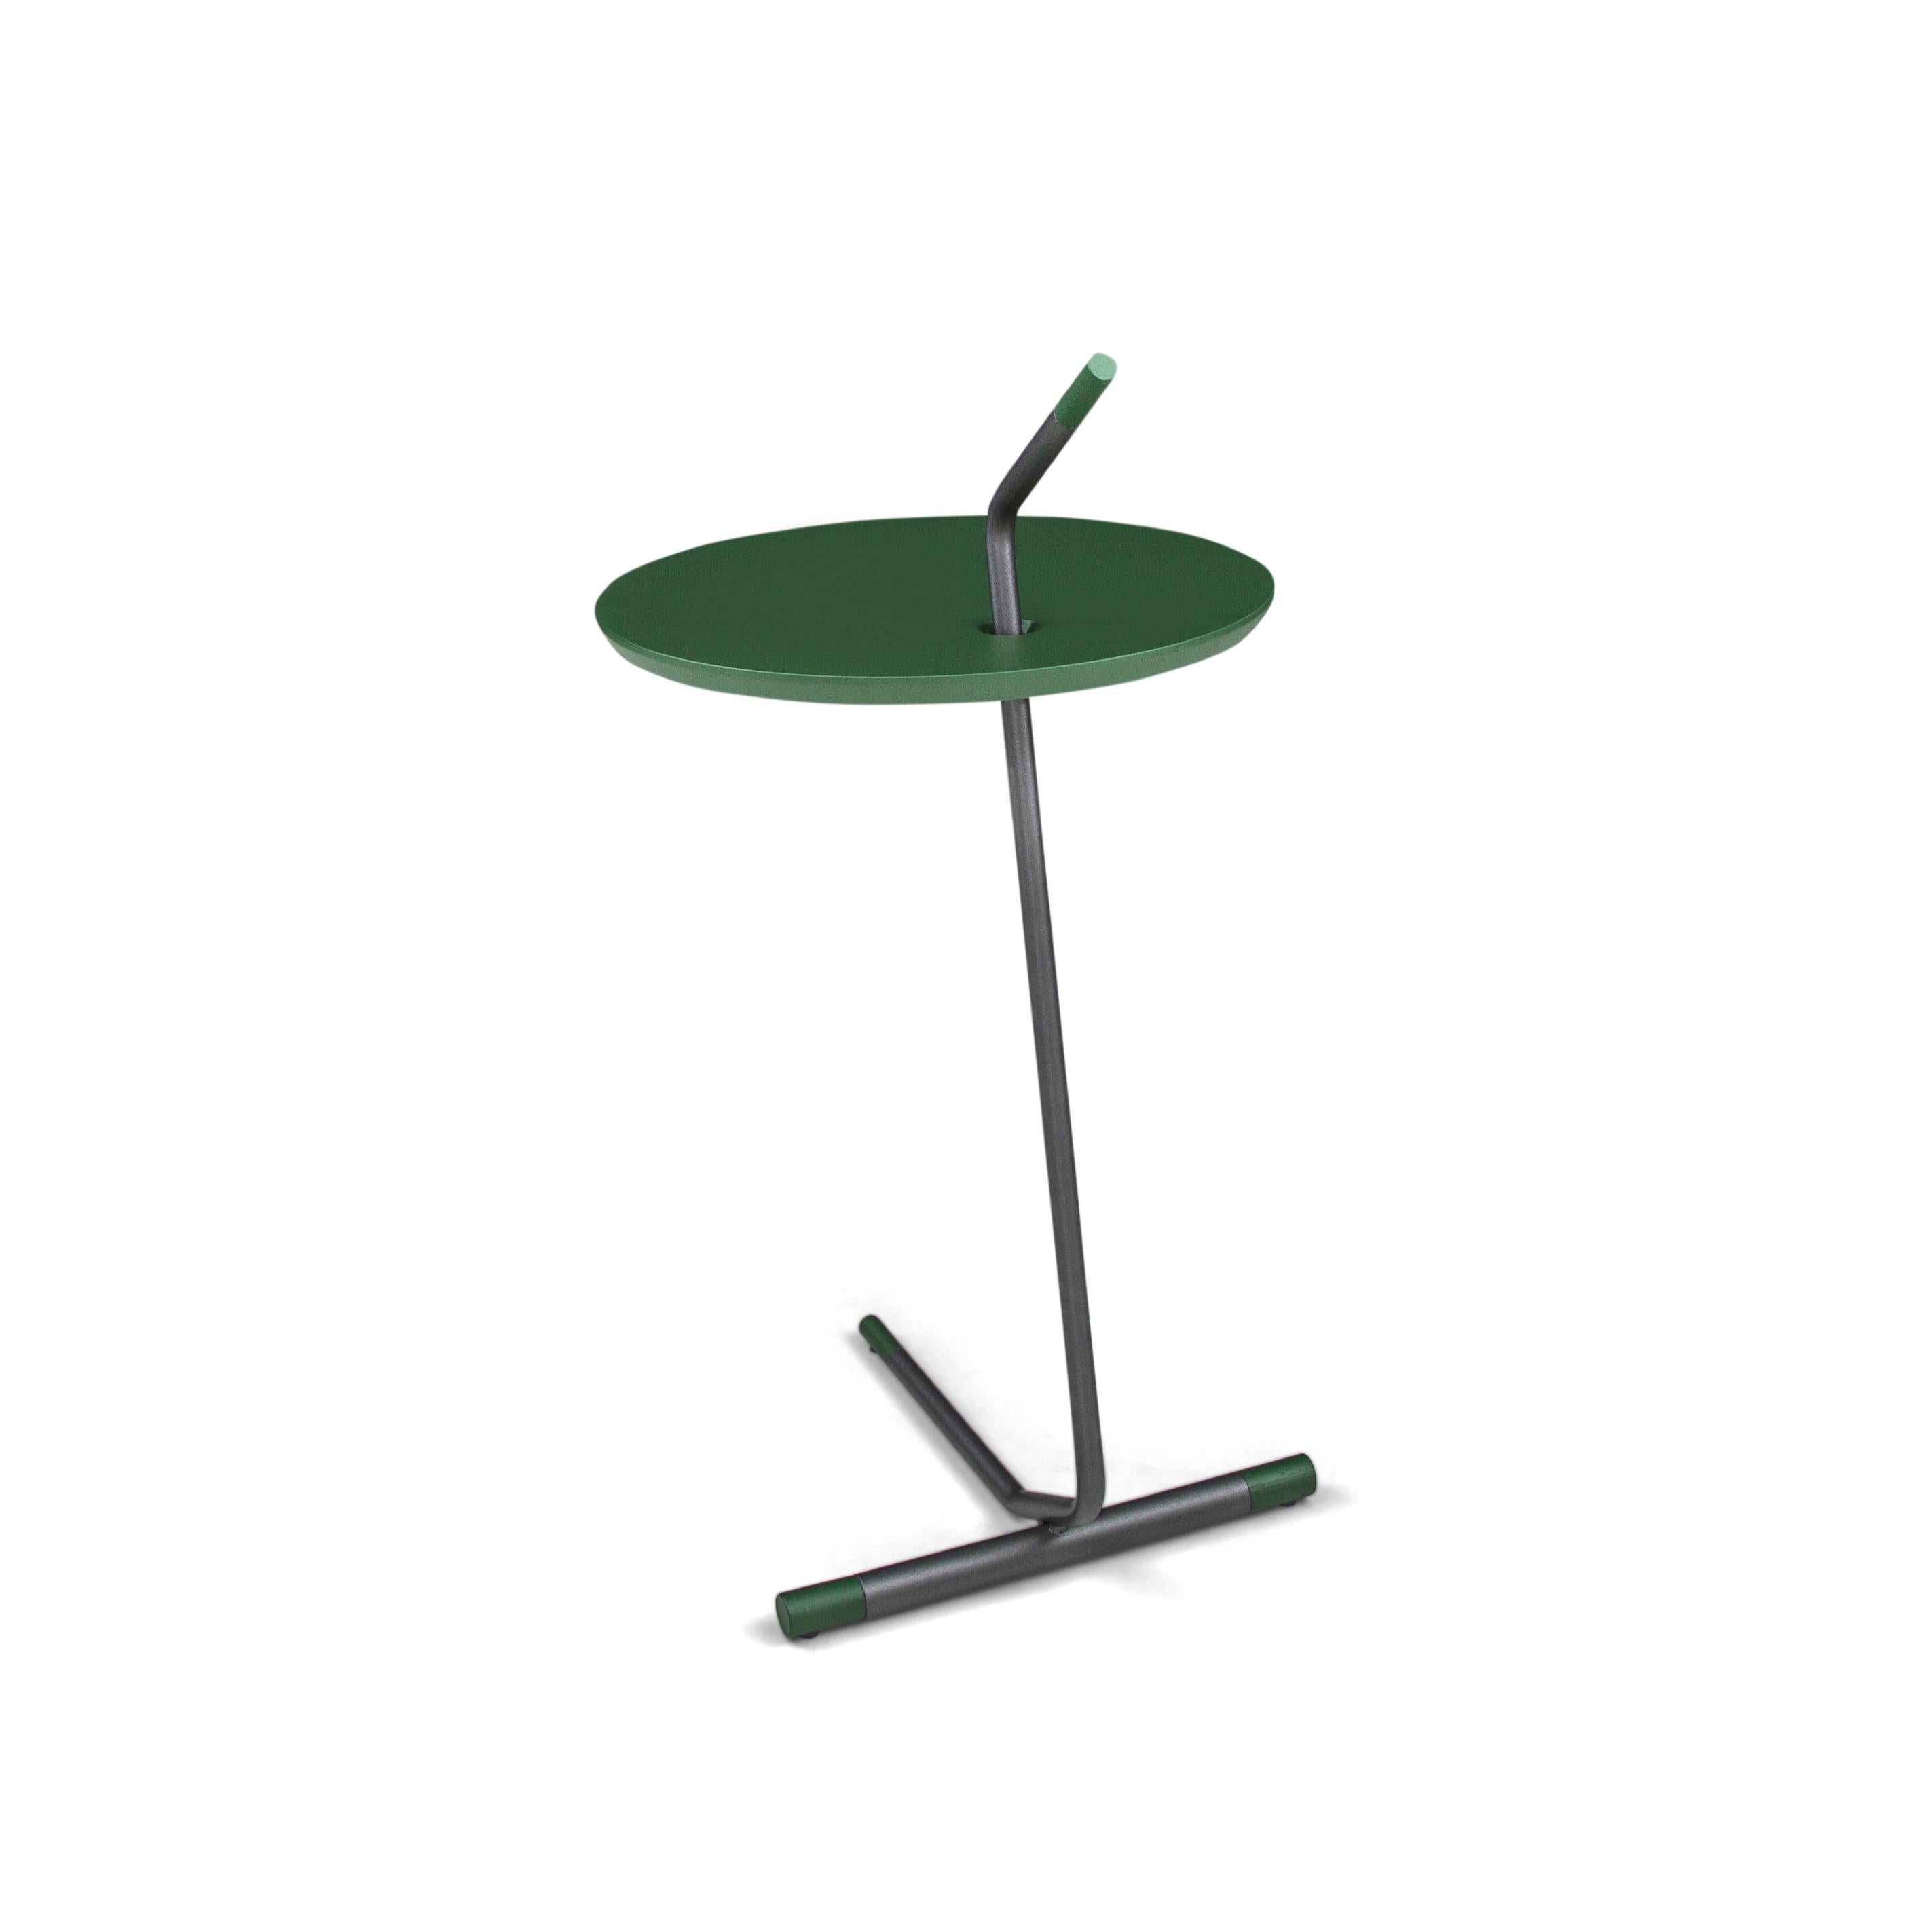 The like side table features an MDF wood top in green finish and a metal base. This table is made of parallels, giving a distinctive shape and an unconventional look. This table features a light pink wood finish and the metal will attract all the